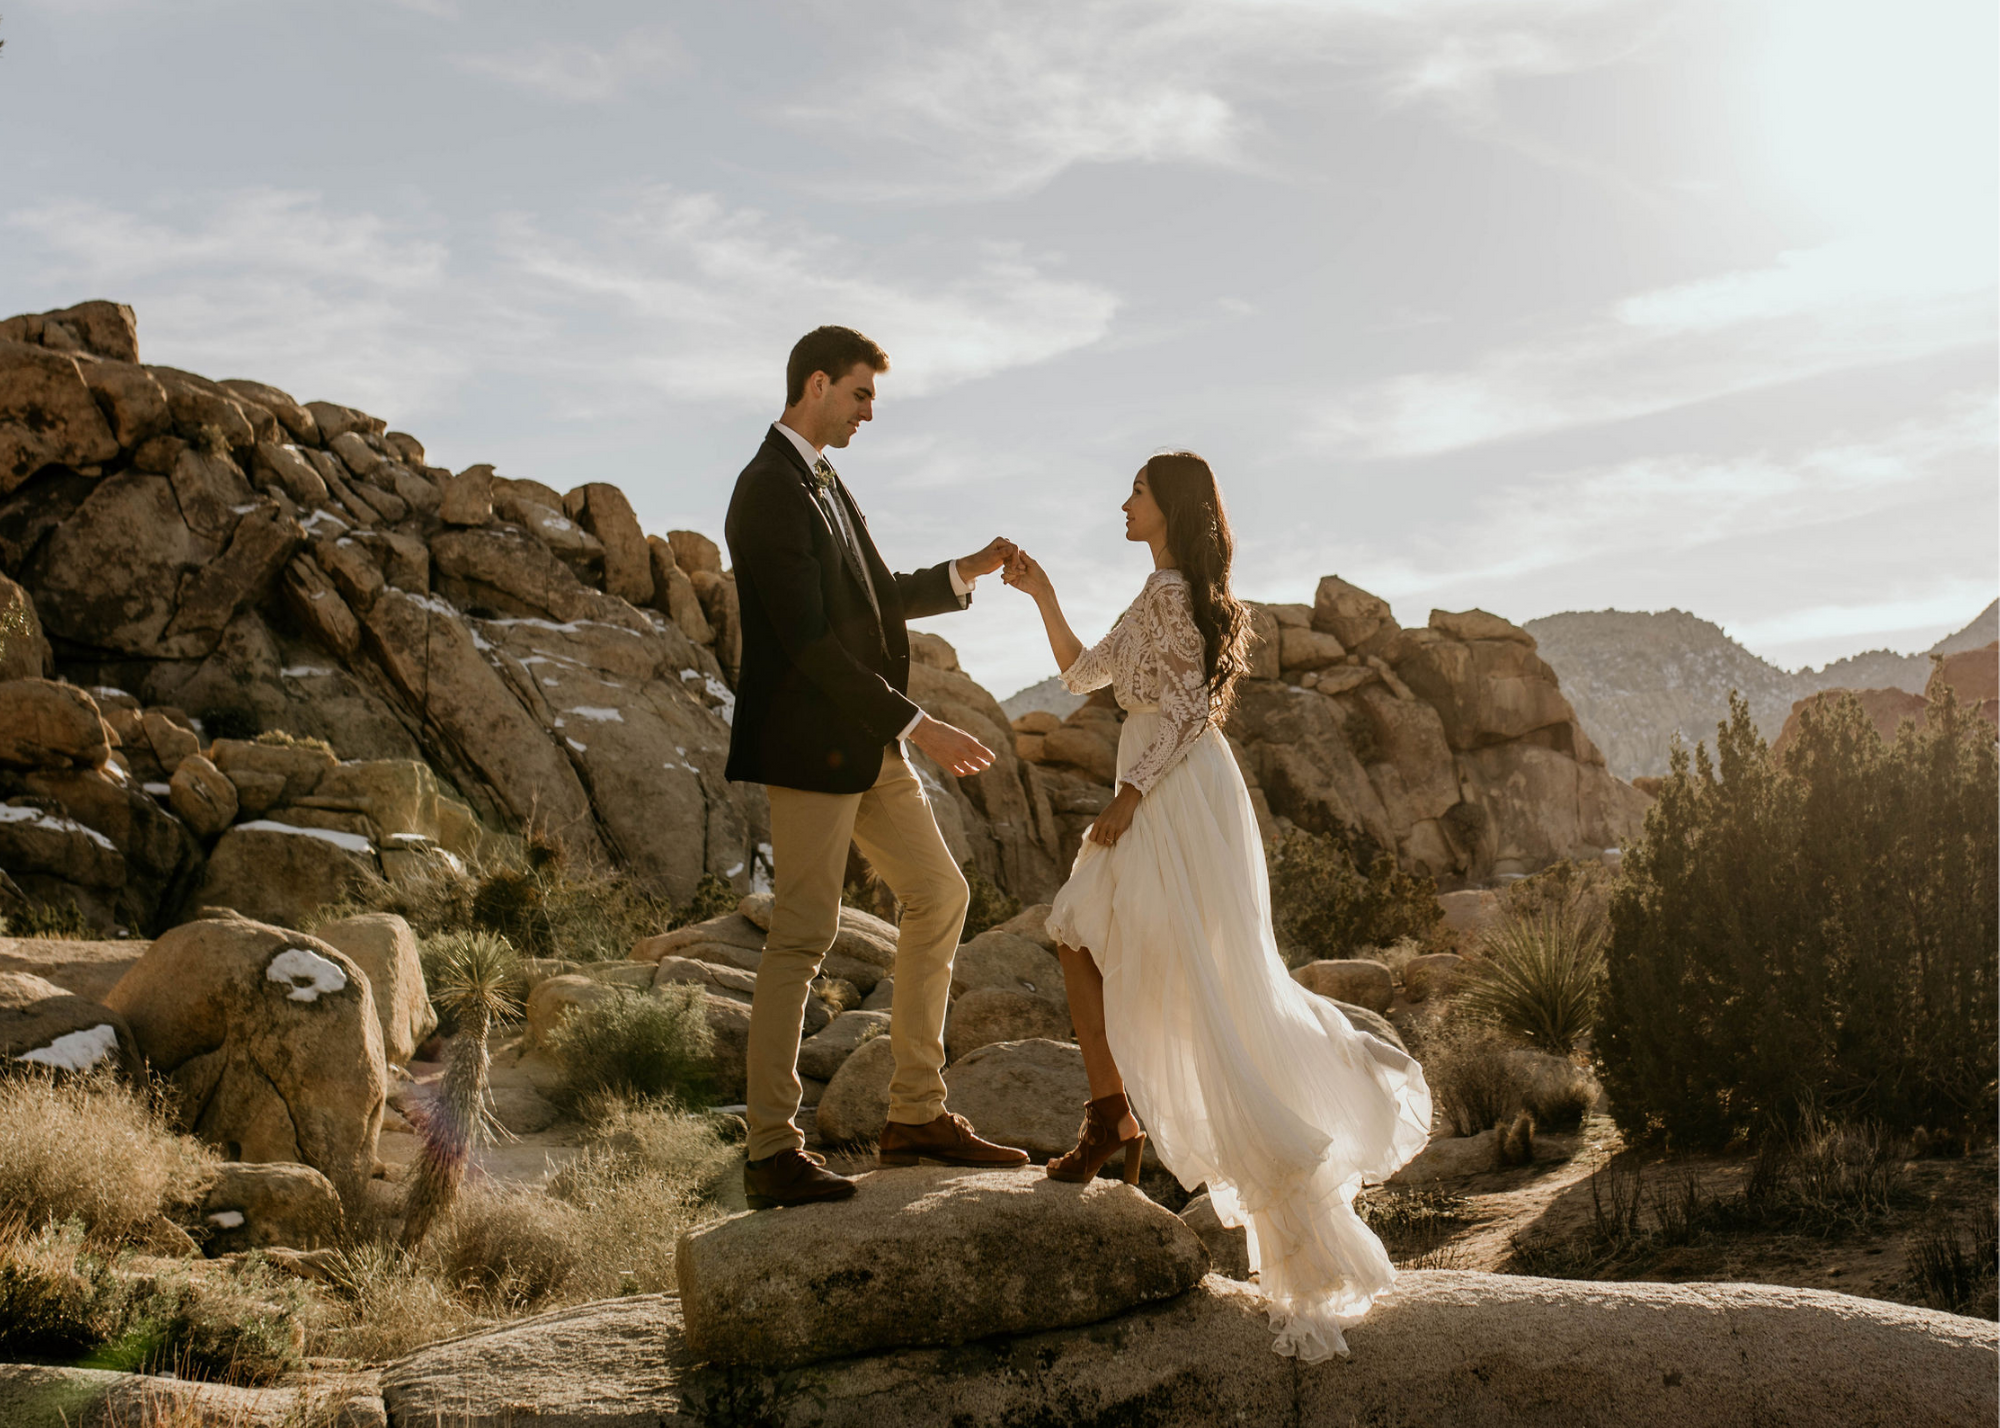 couple holding hands standing on rocks in desert, joshua tree national park, elopement getting married, wedding day